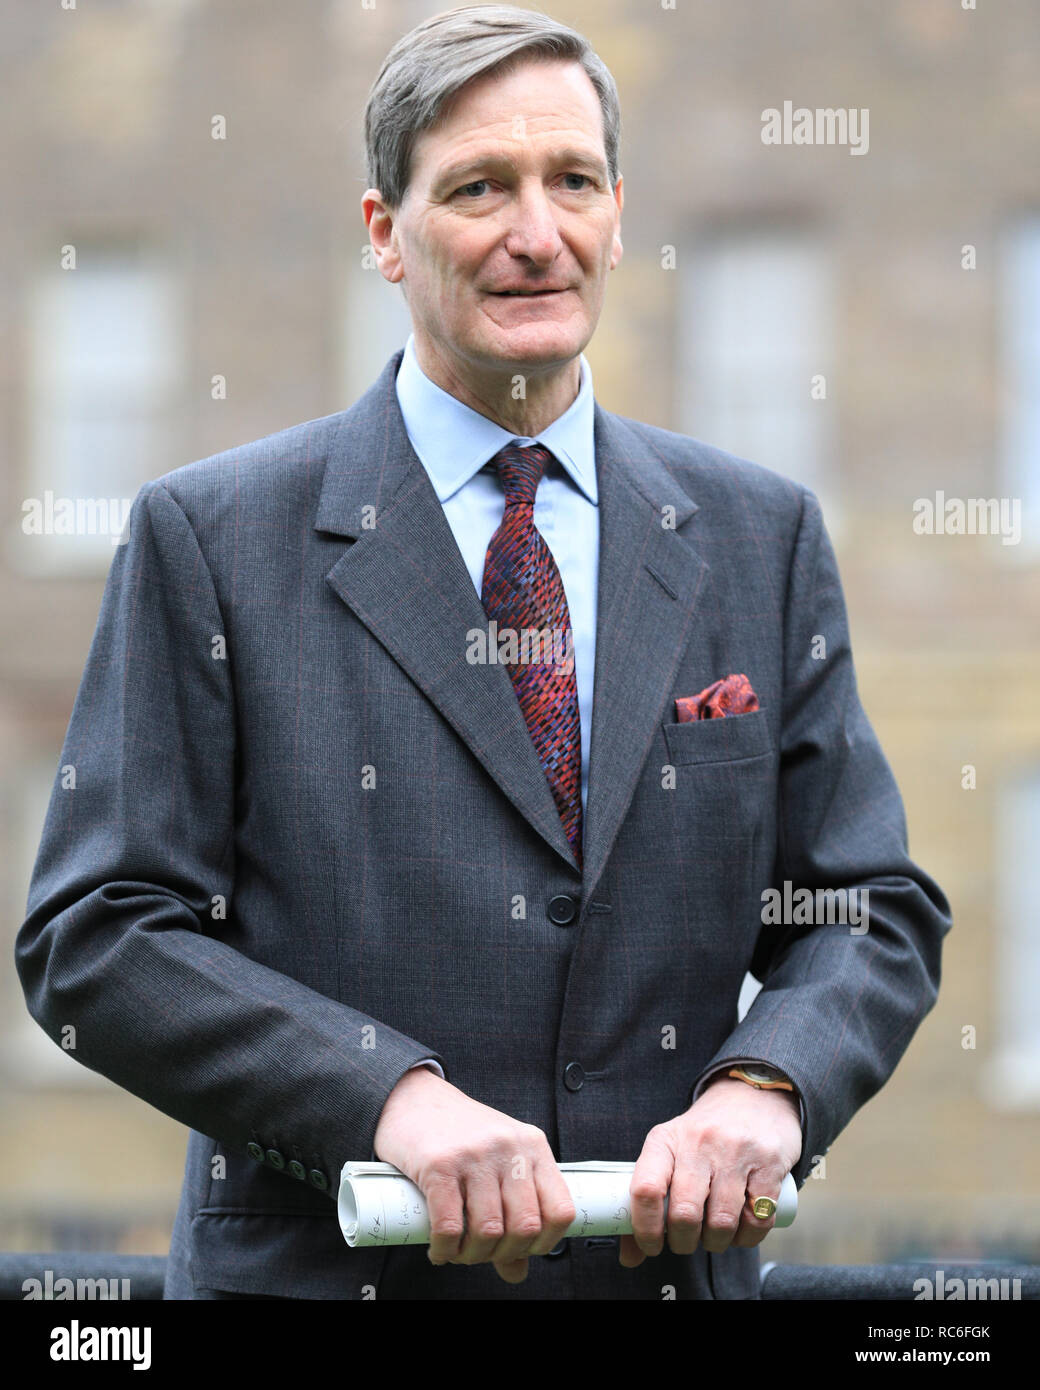 Westminster, London, UK. 14th Jan, 2019. Dominic Grieve, QC, Conservative Party MP for Beaconsfield, on College Green, Westminster. Amendments proposed by Grieve aimed at ensuring greater scrutiny of the government's proposed arrangement to leave the EU were recently voted through in Parliament, inflicting a defeat on government on several points. Credit: Imageplotter News and Sports/Alamy Live News Stock Photo